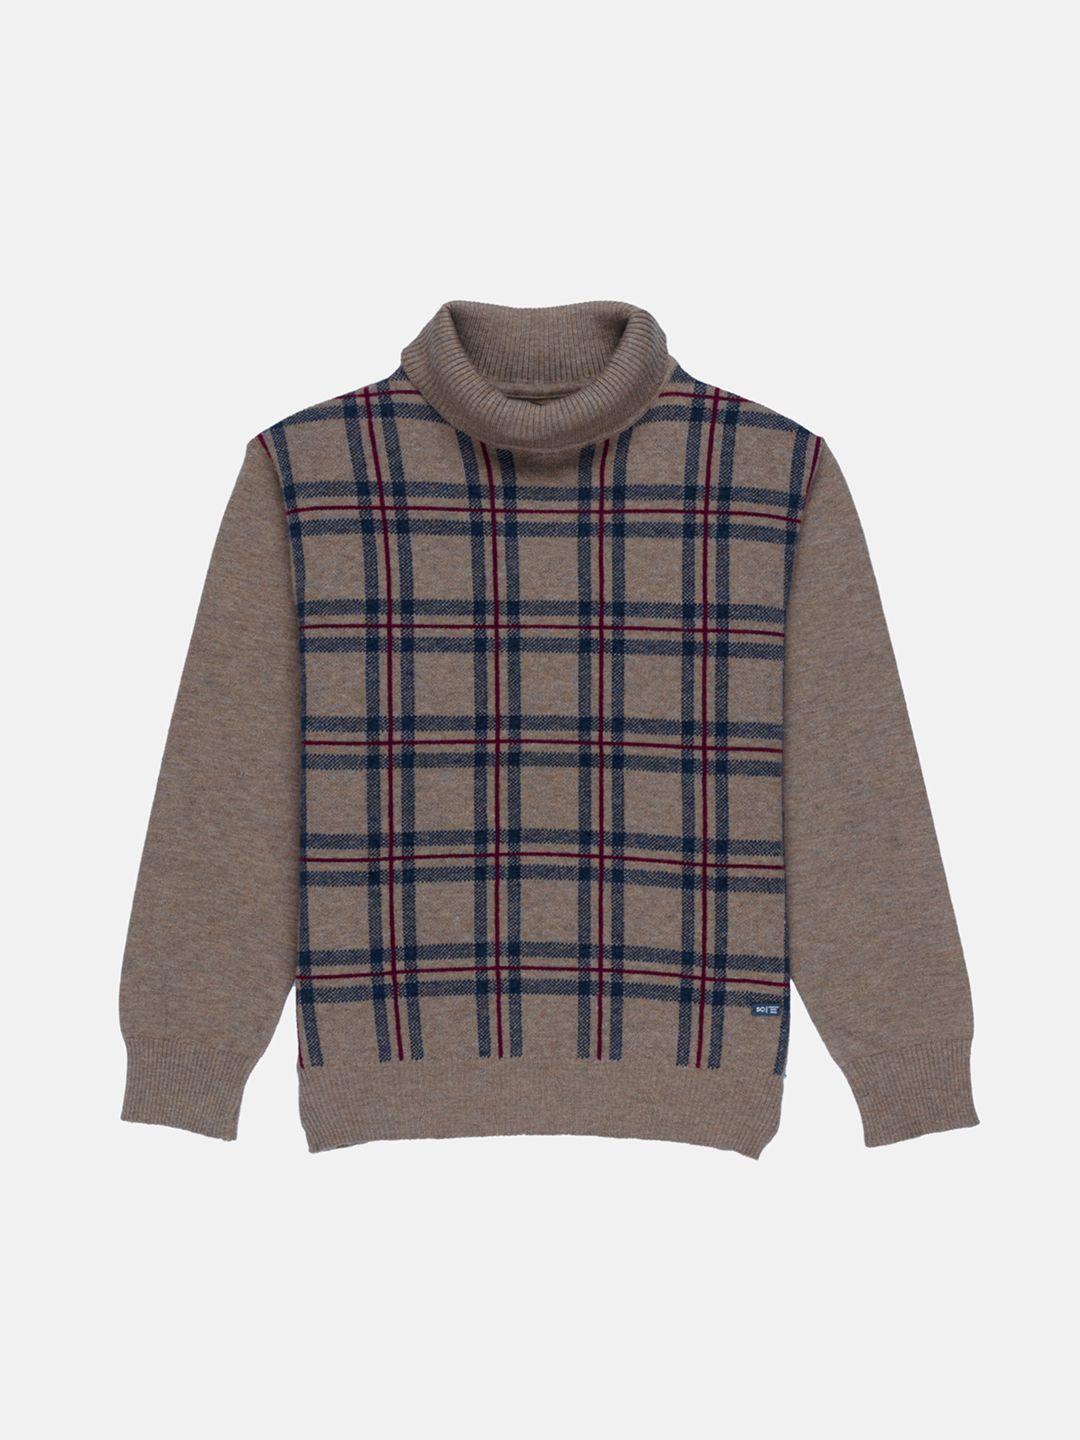 status quo boys brown & teal checked acrylic pullover